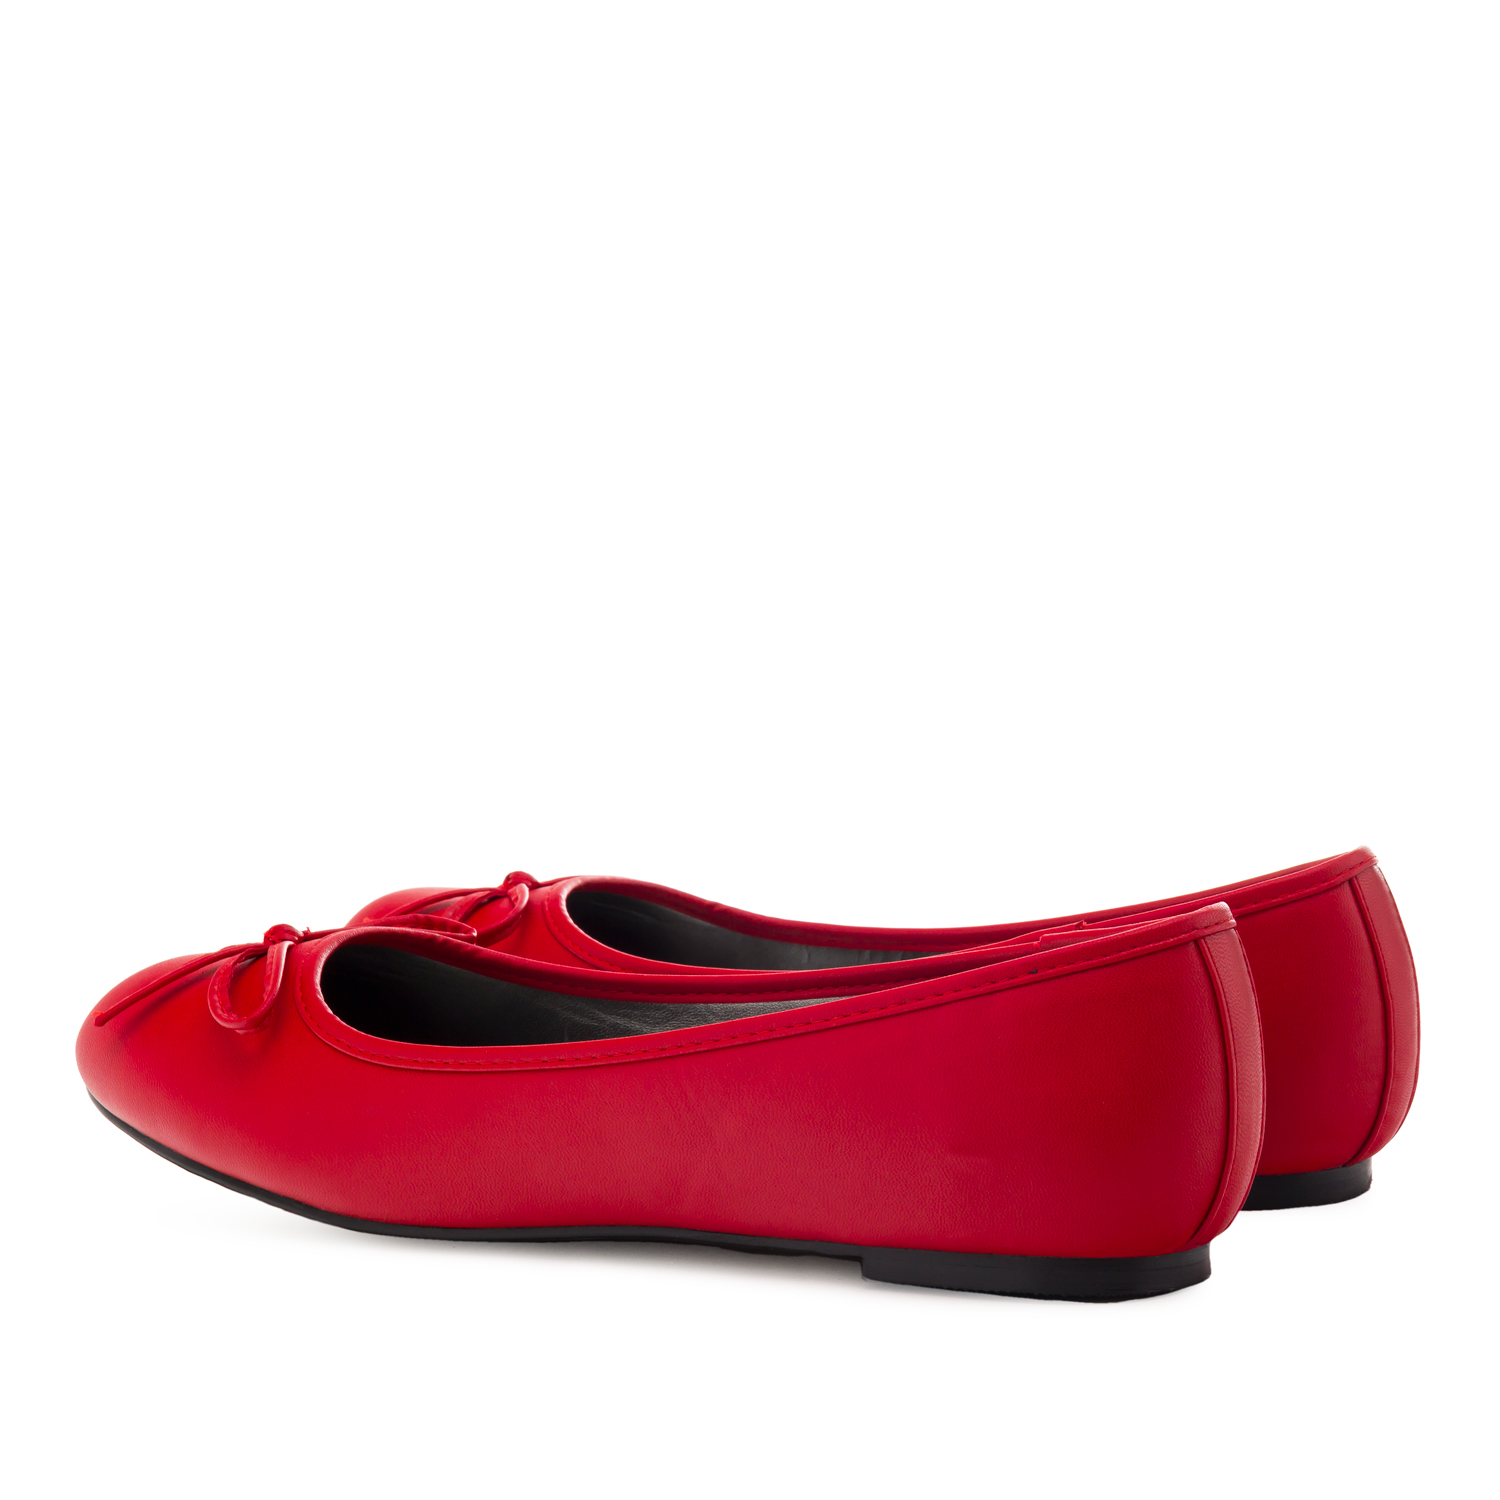 Flat classic ballerina, large sizes, imitation leather in red 